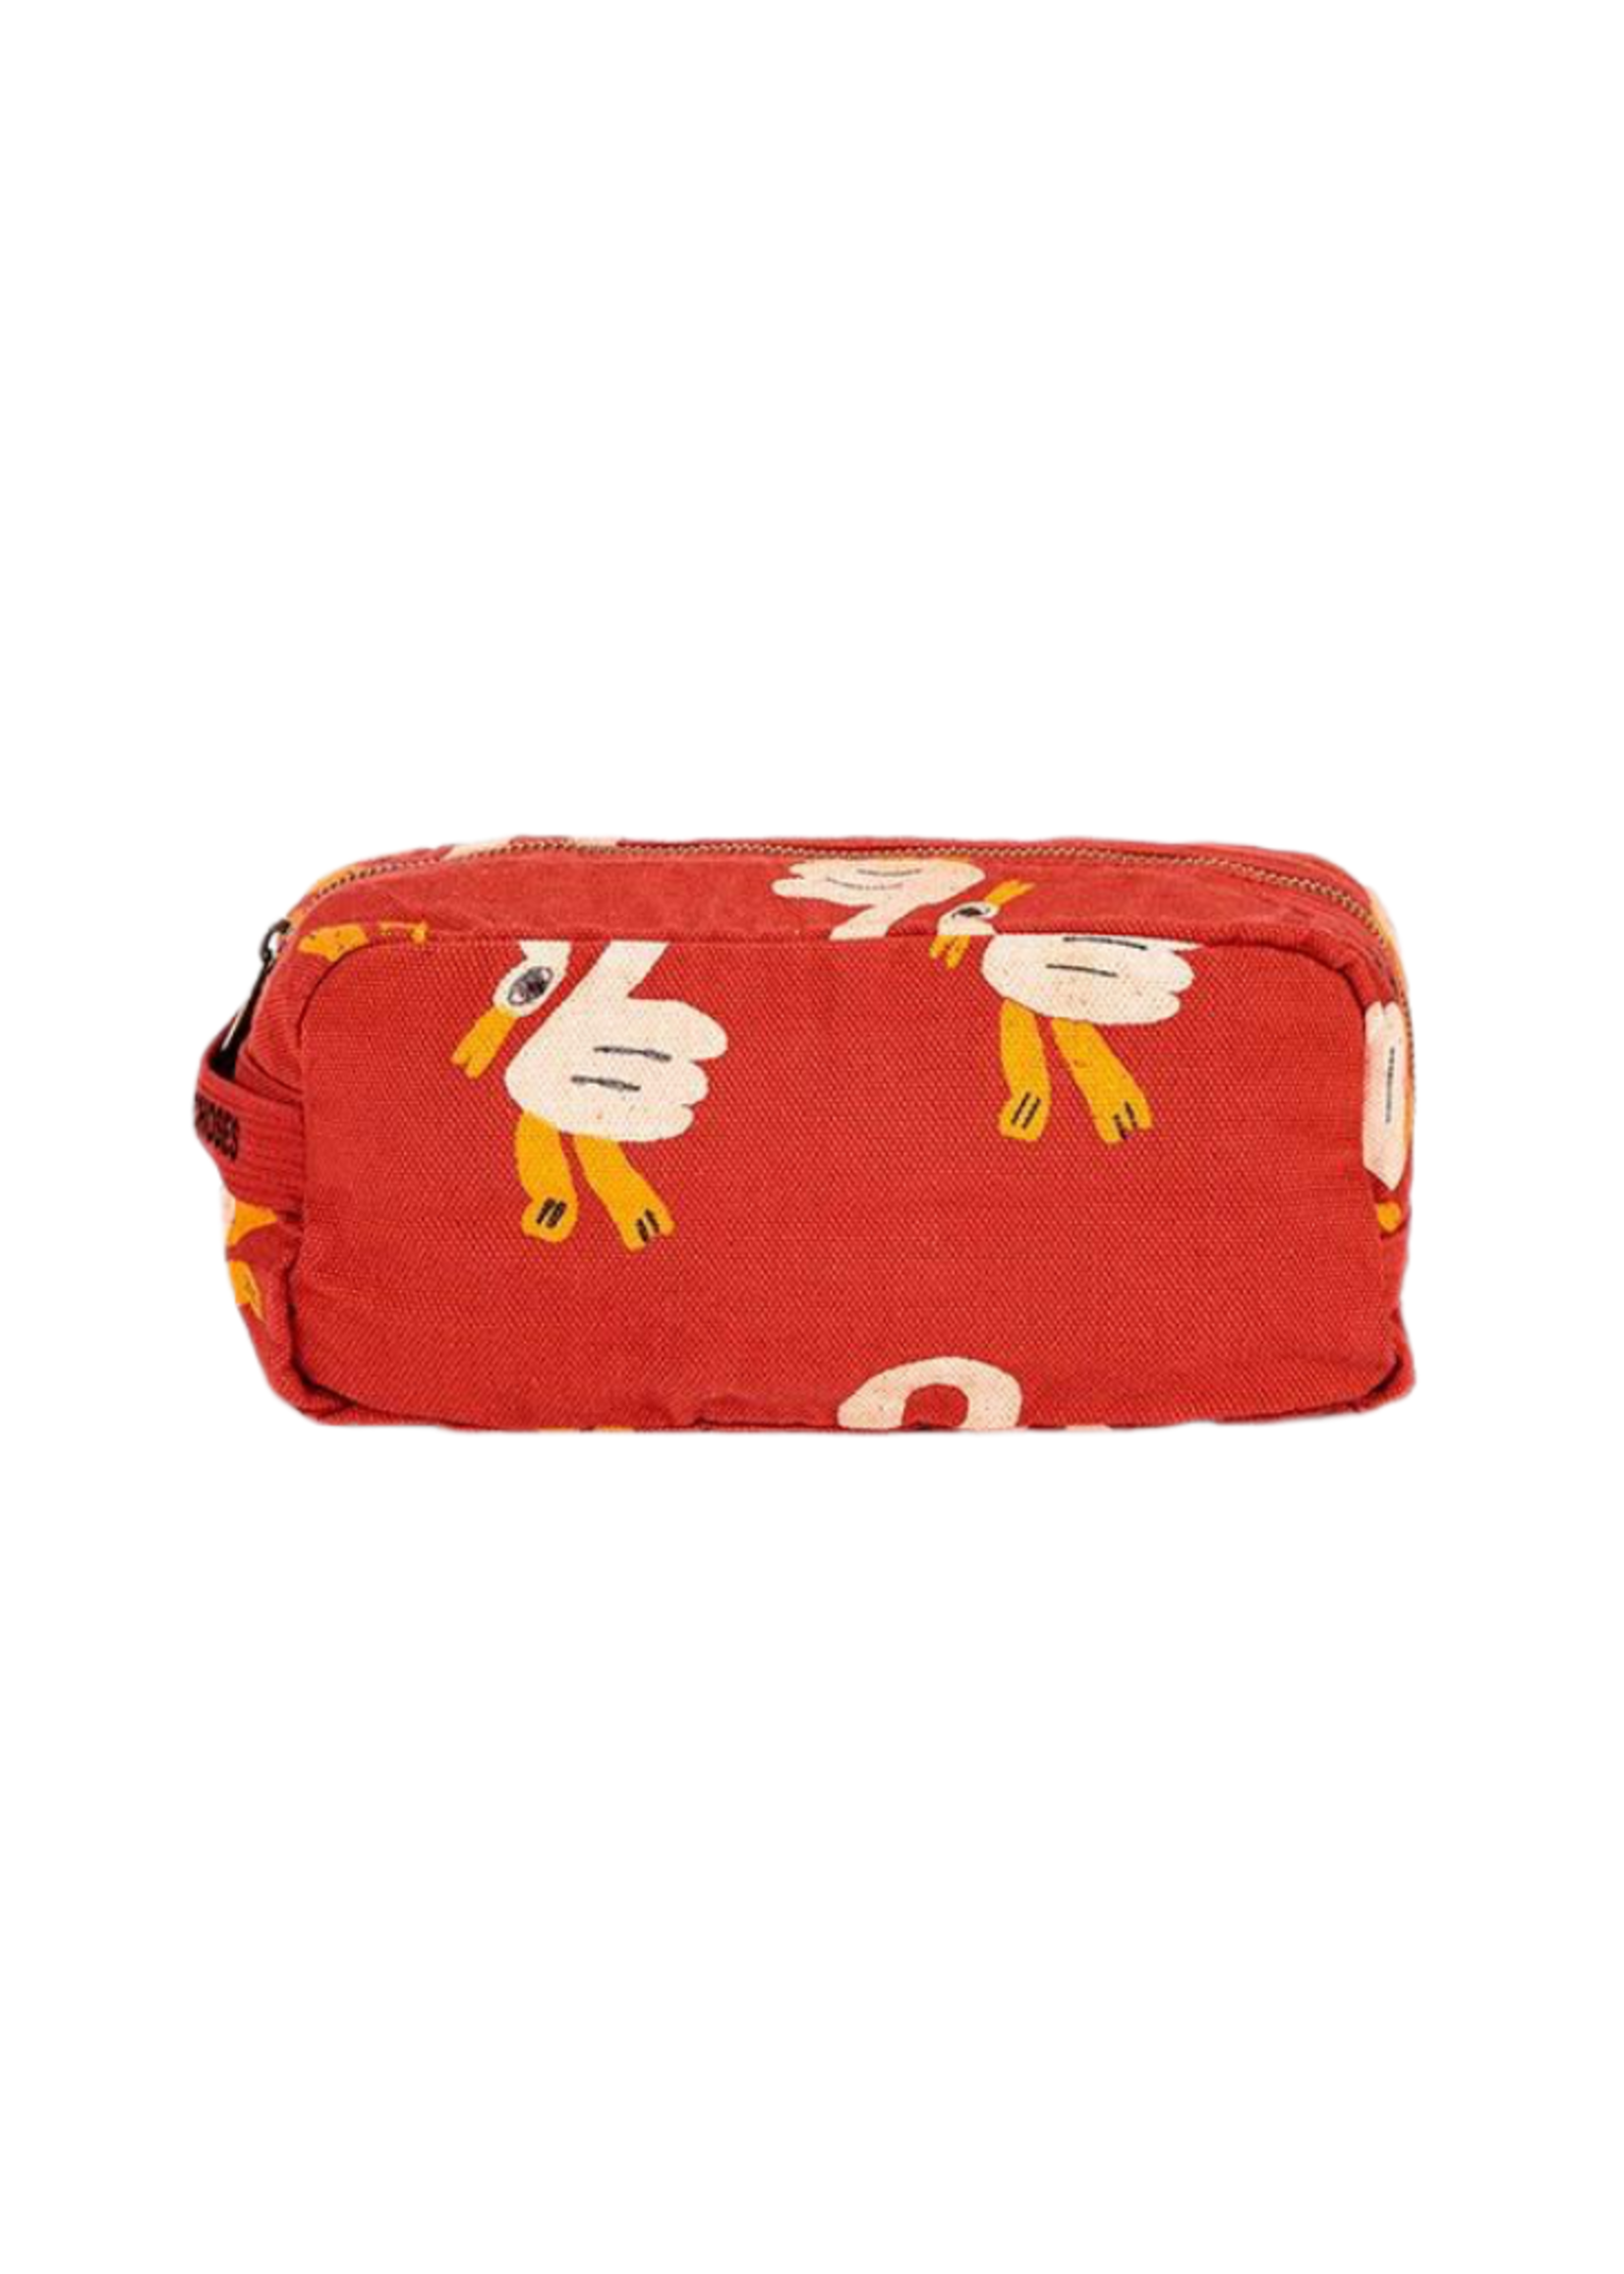 Bobo Choses Pelican All Over Pouch